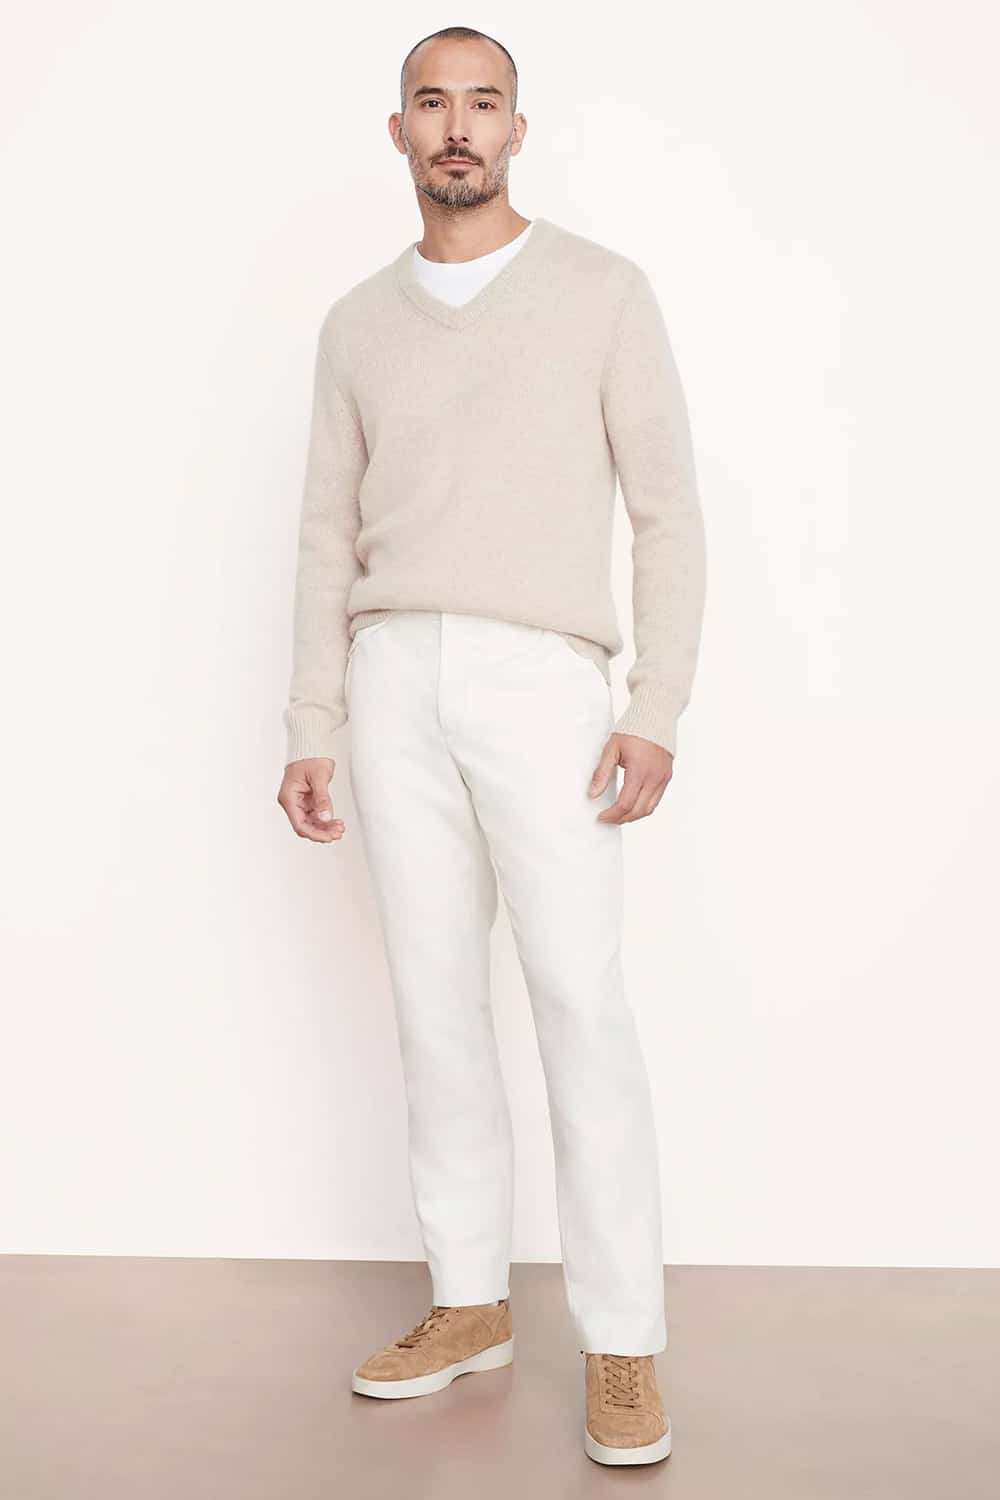 All White Outfits For Men: 22 Cool Looks For Summer 2024